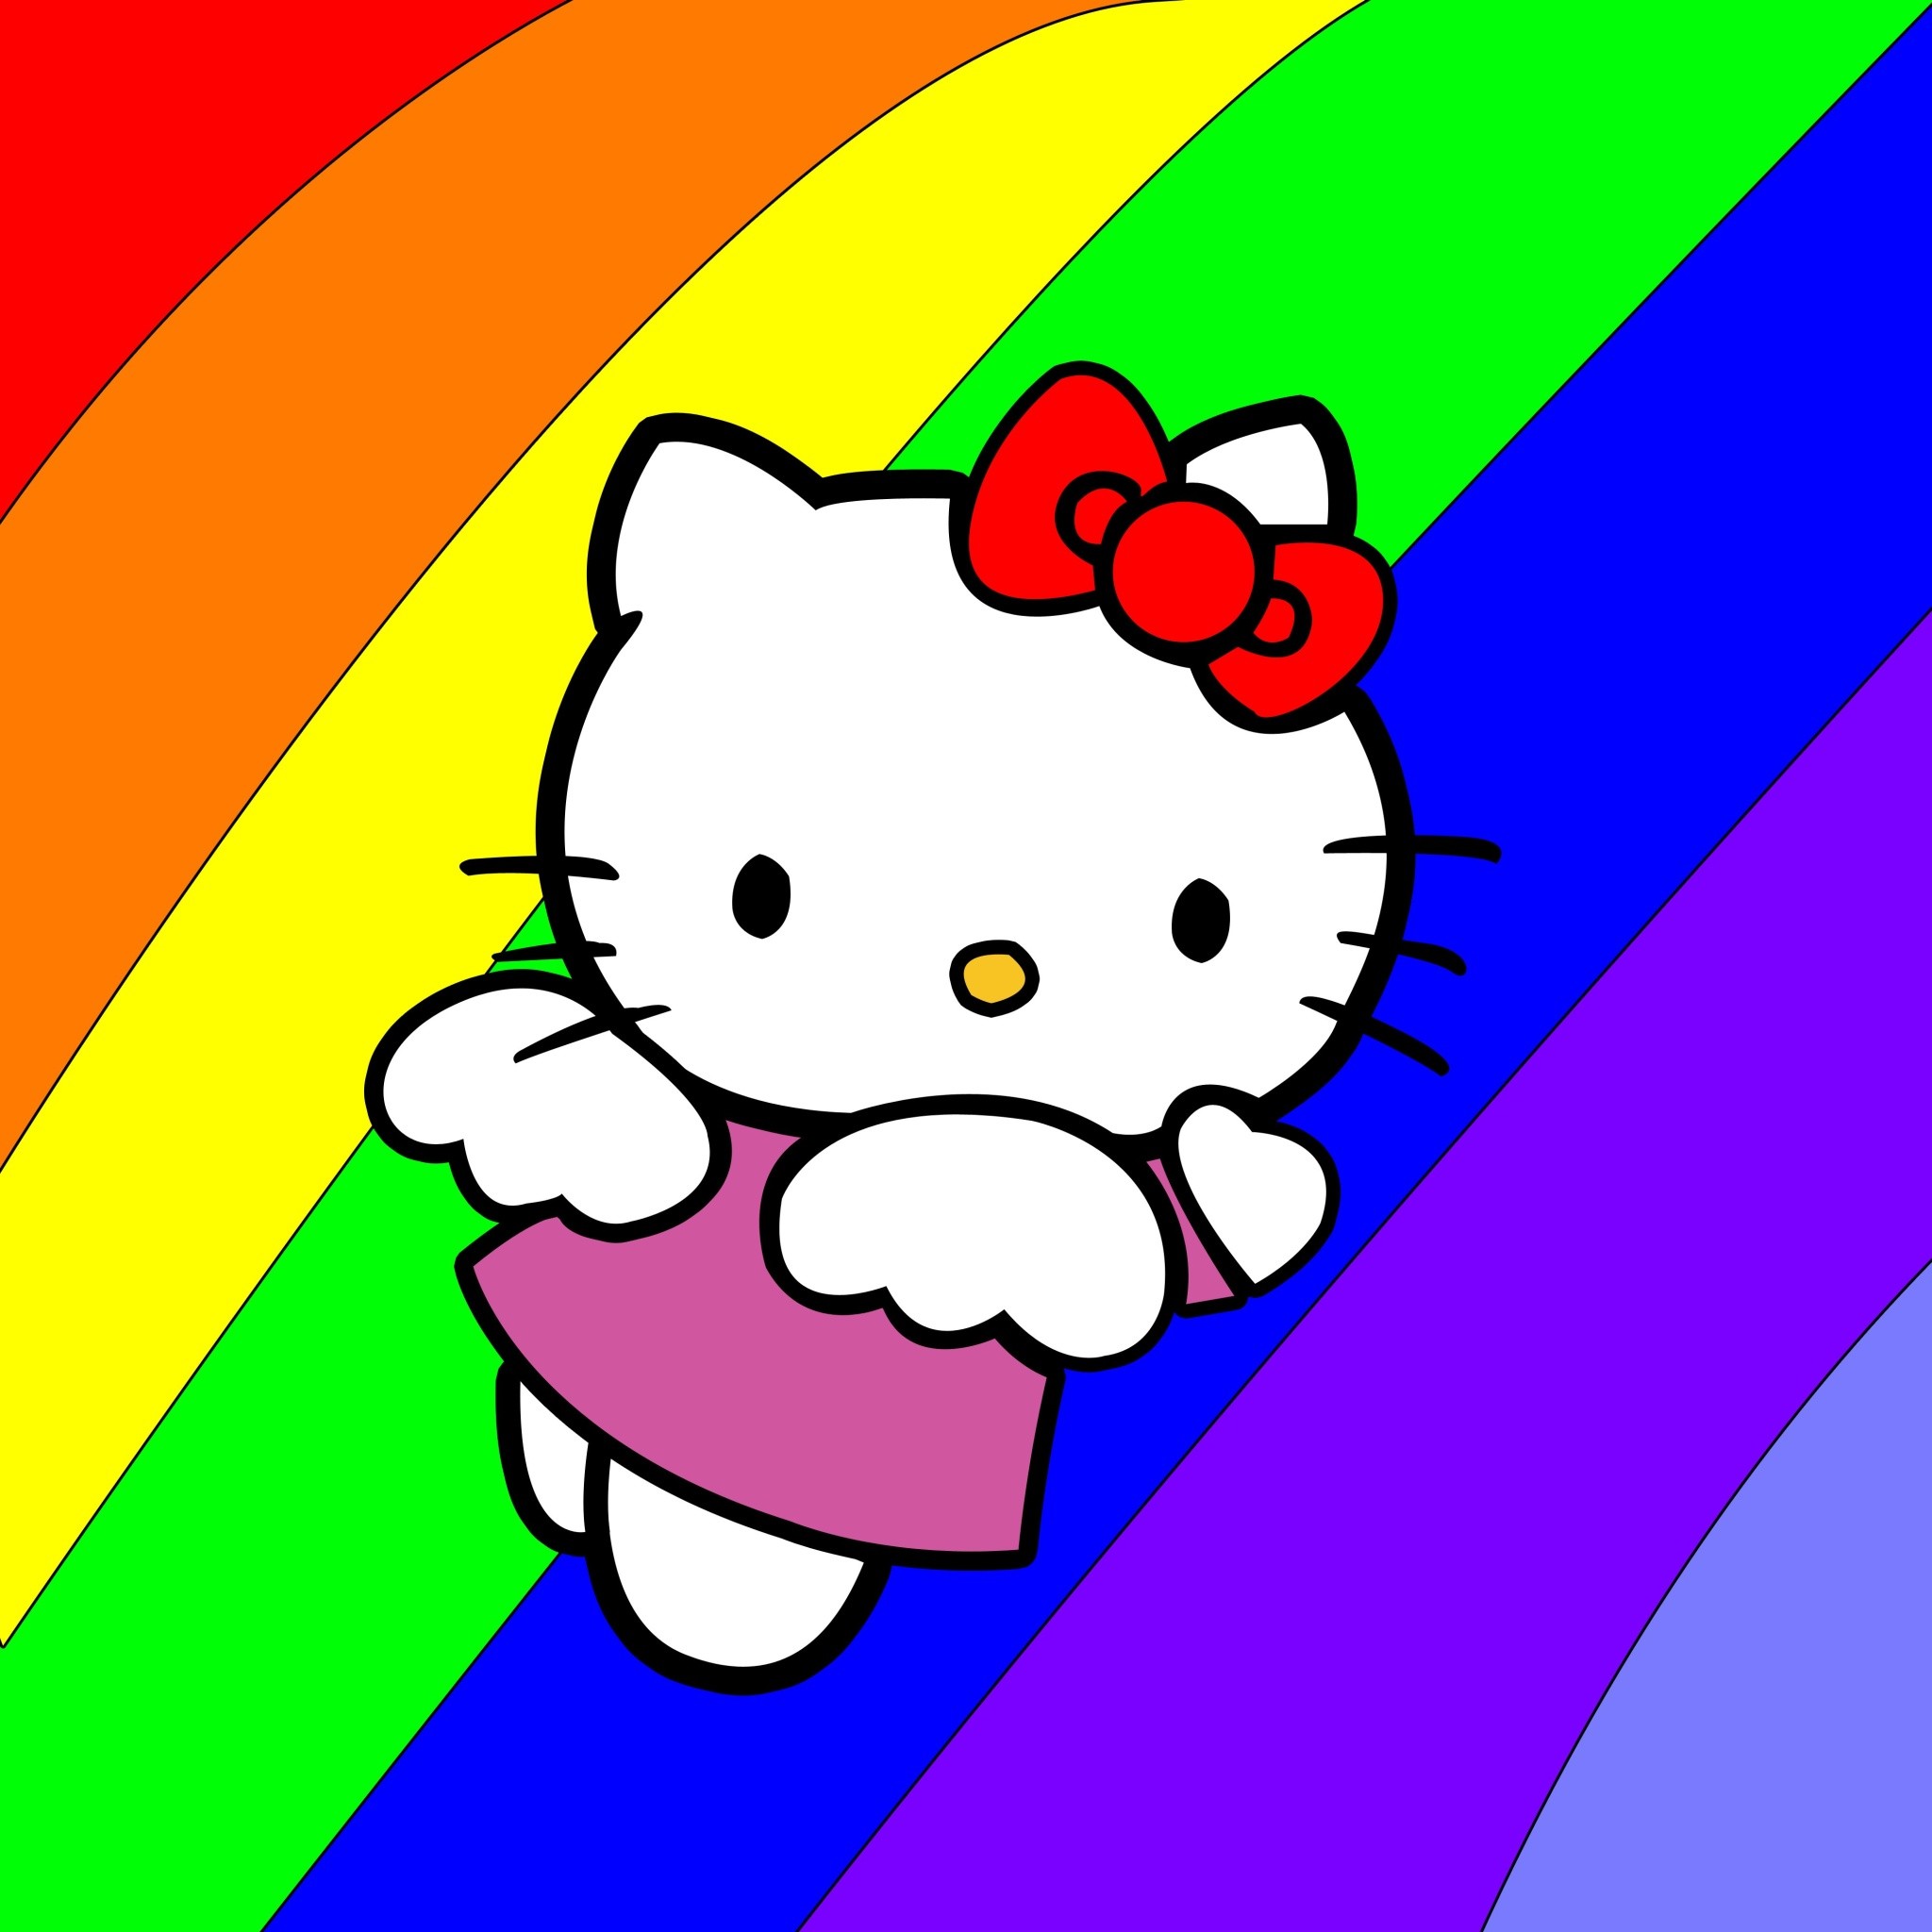 2048x2048 Colorful Hello Kitty - Tap to see more cute hello kitty wallpapers! -  @mobile9